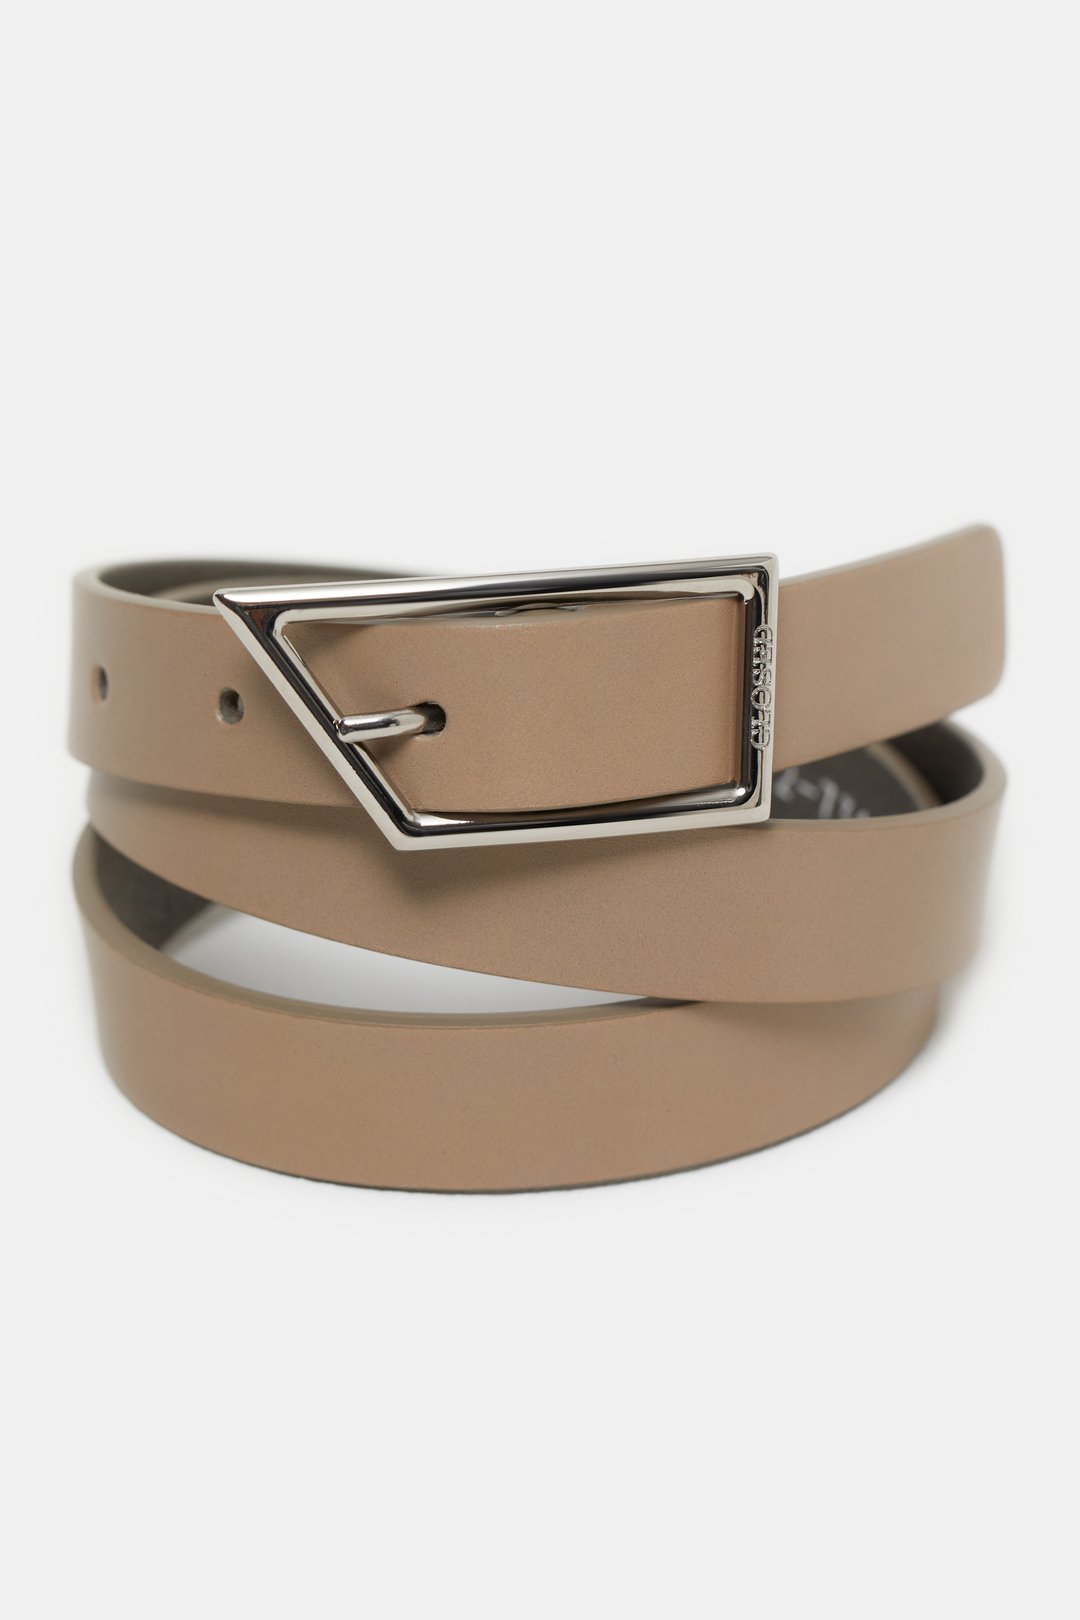 CLOSED WOMENS NARROW LEATHER BELT - 2 COLORS